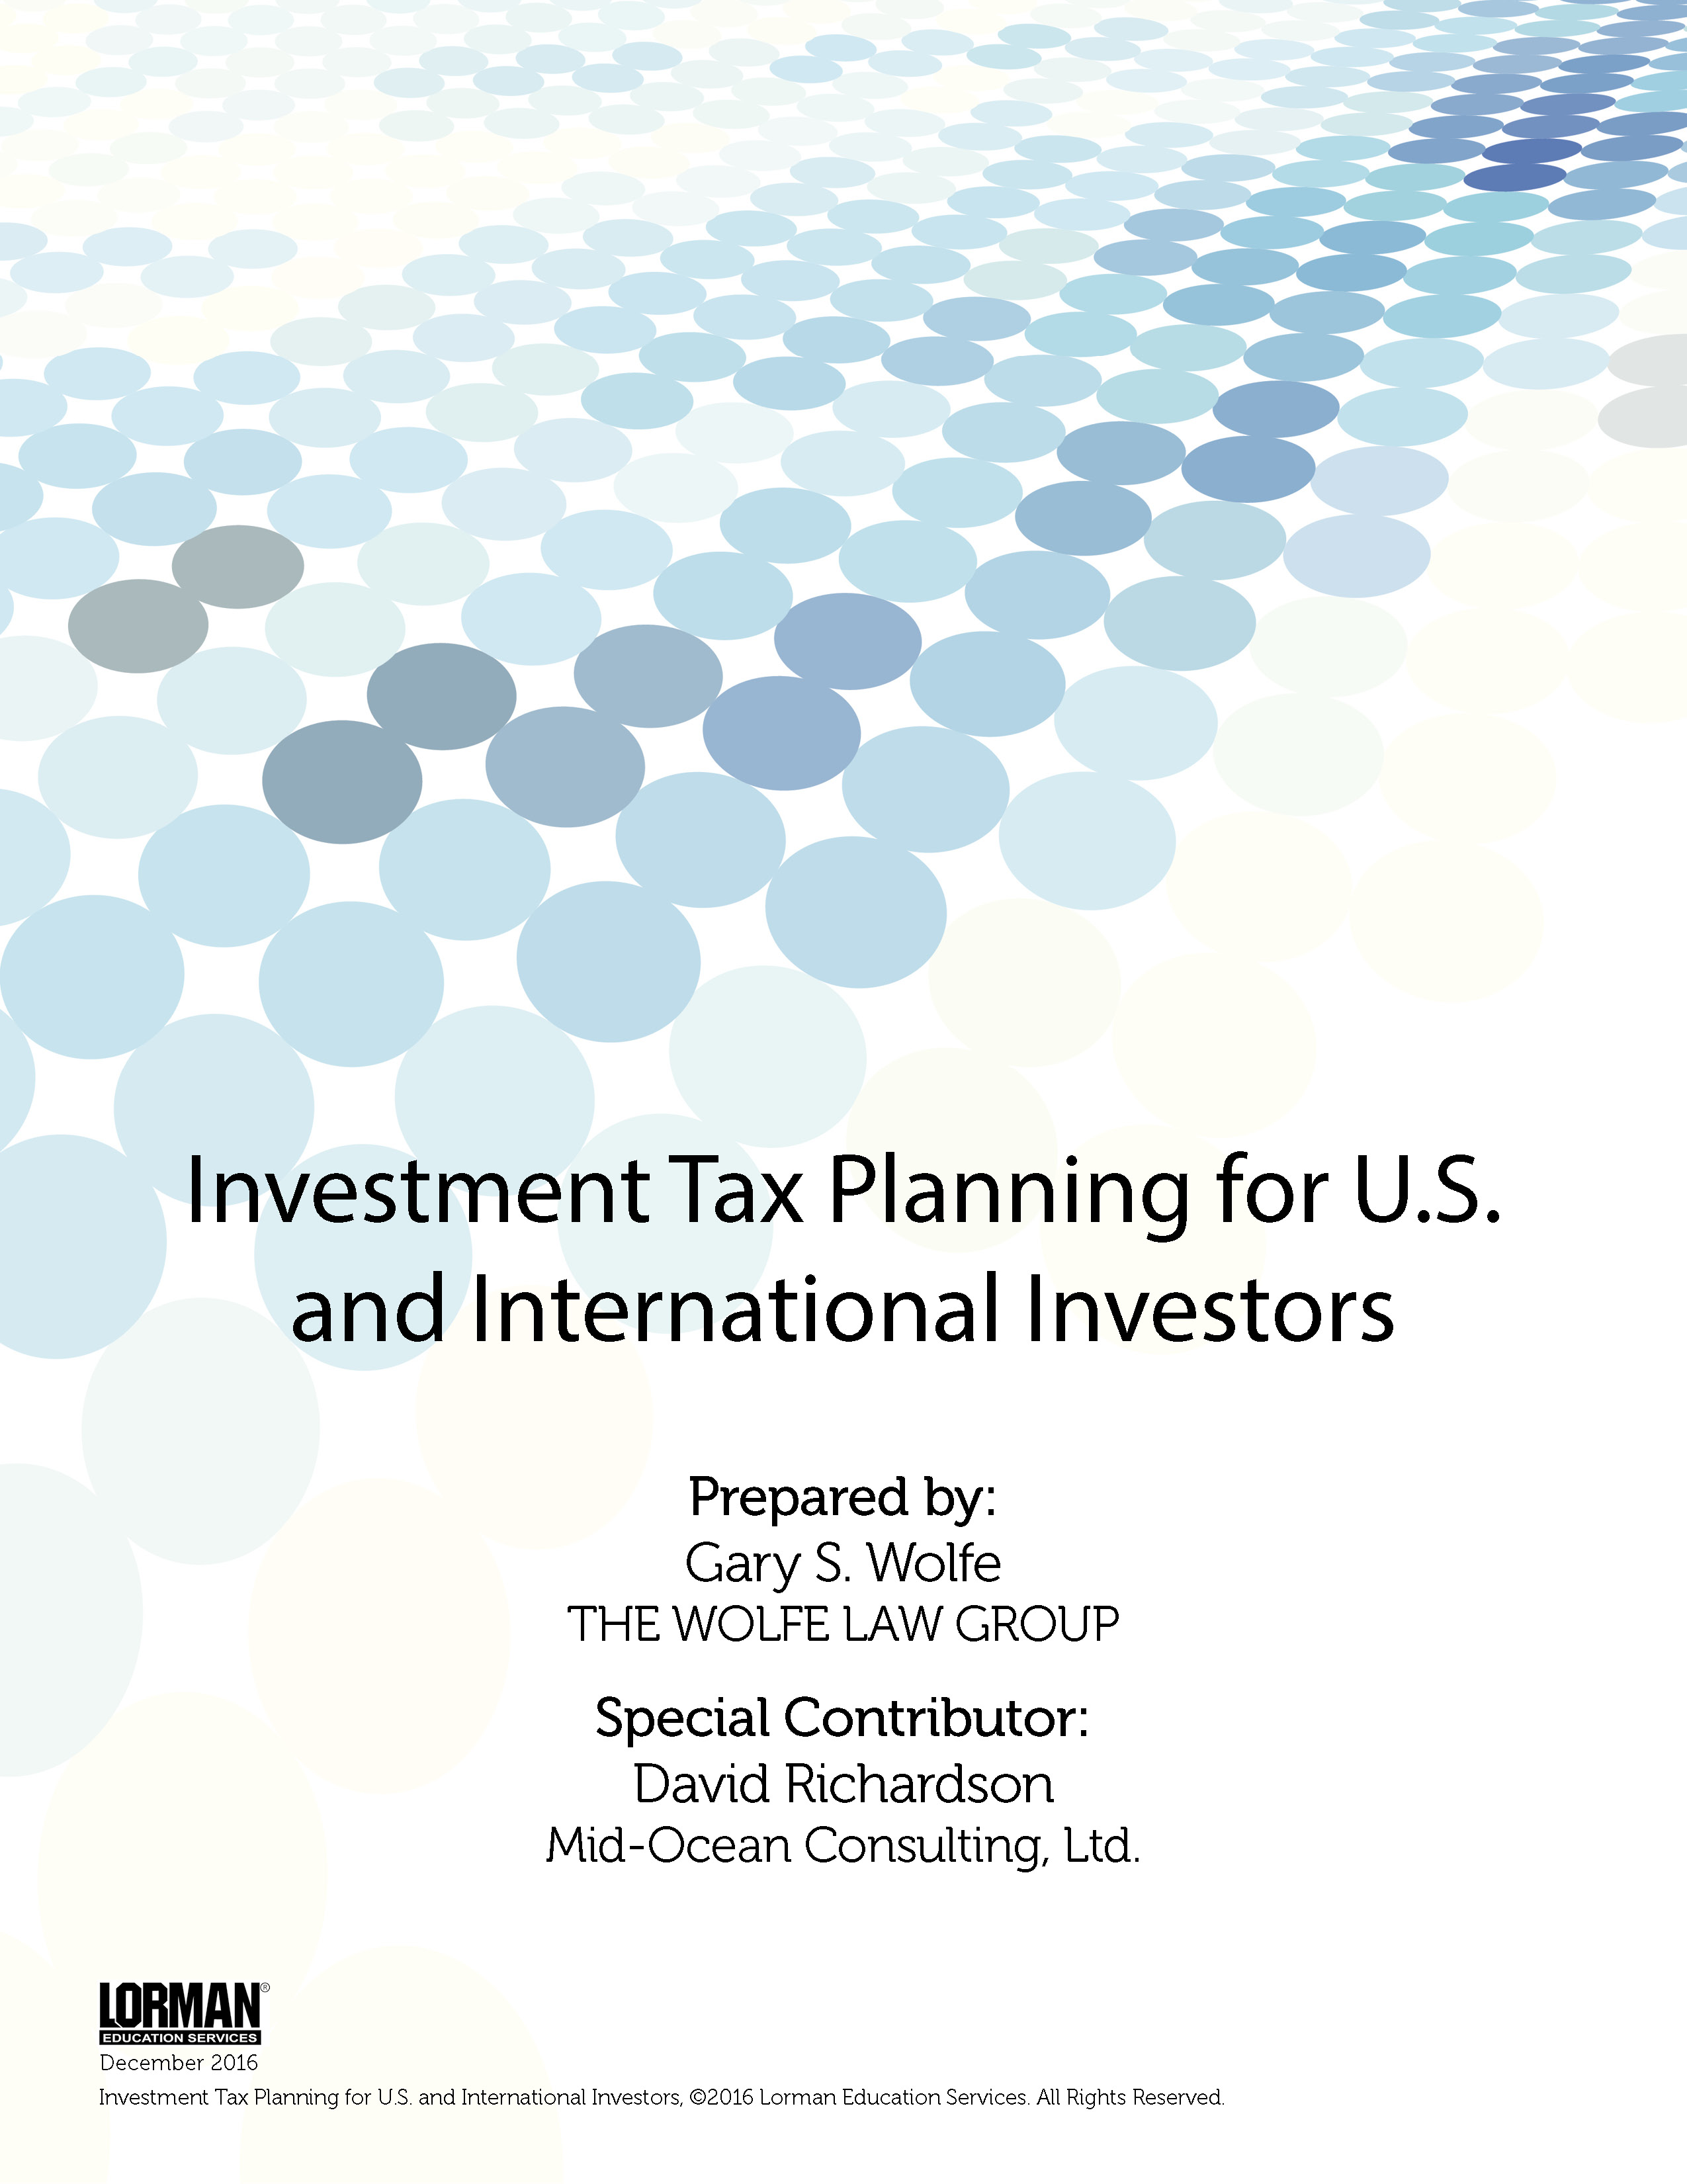 Investment Tax Planning for U.S. and International Investors